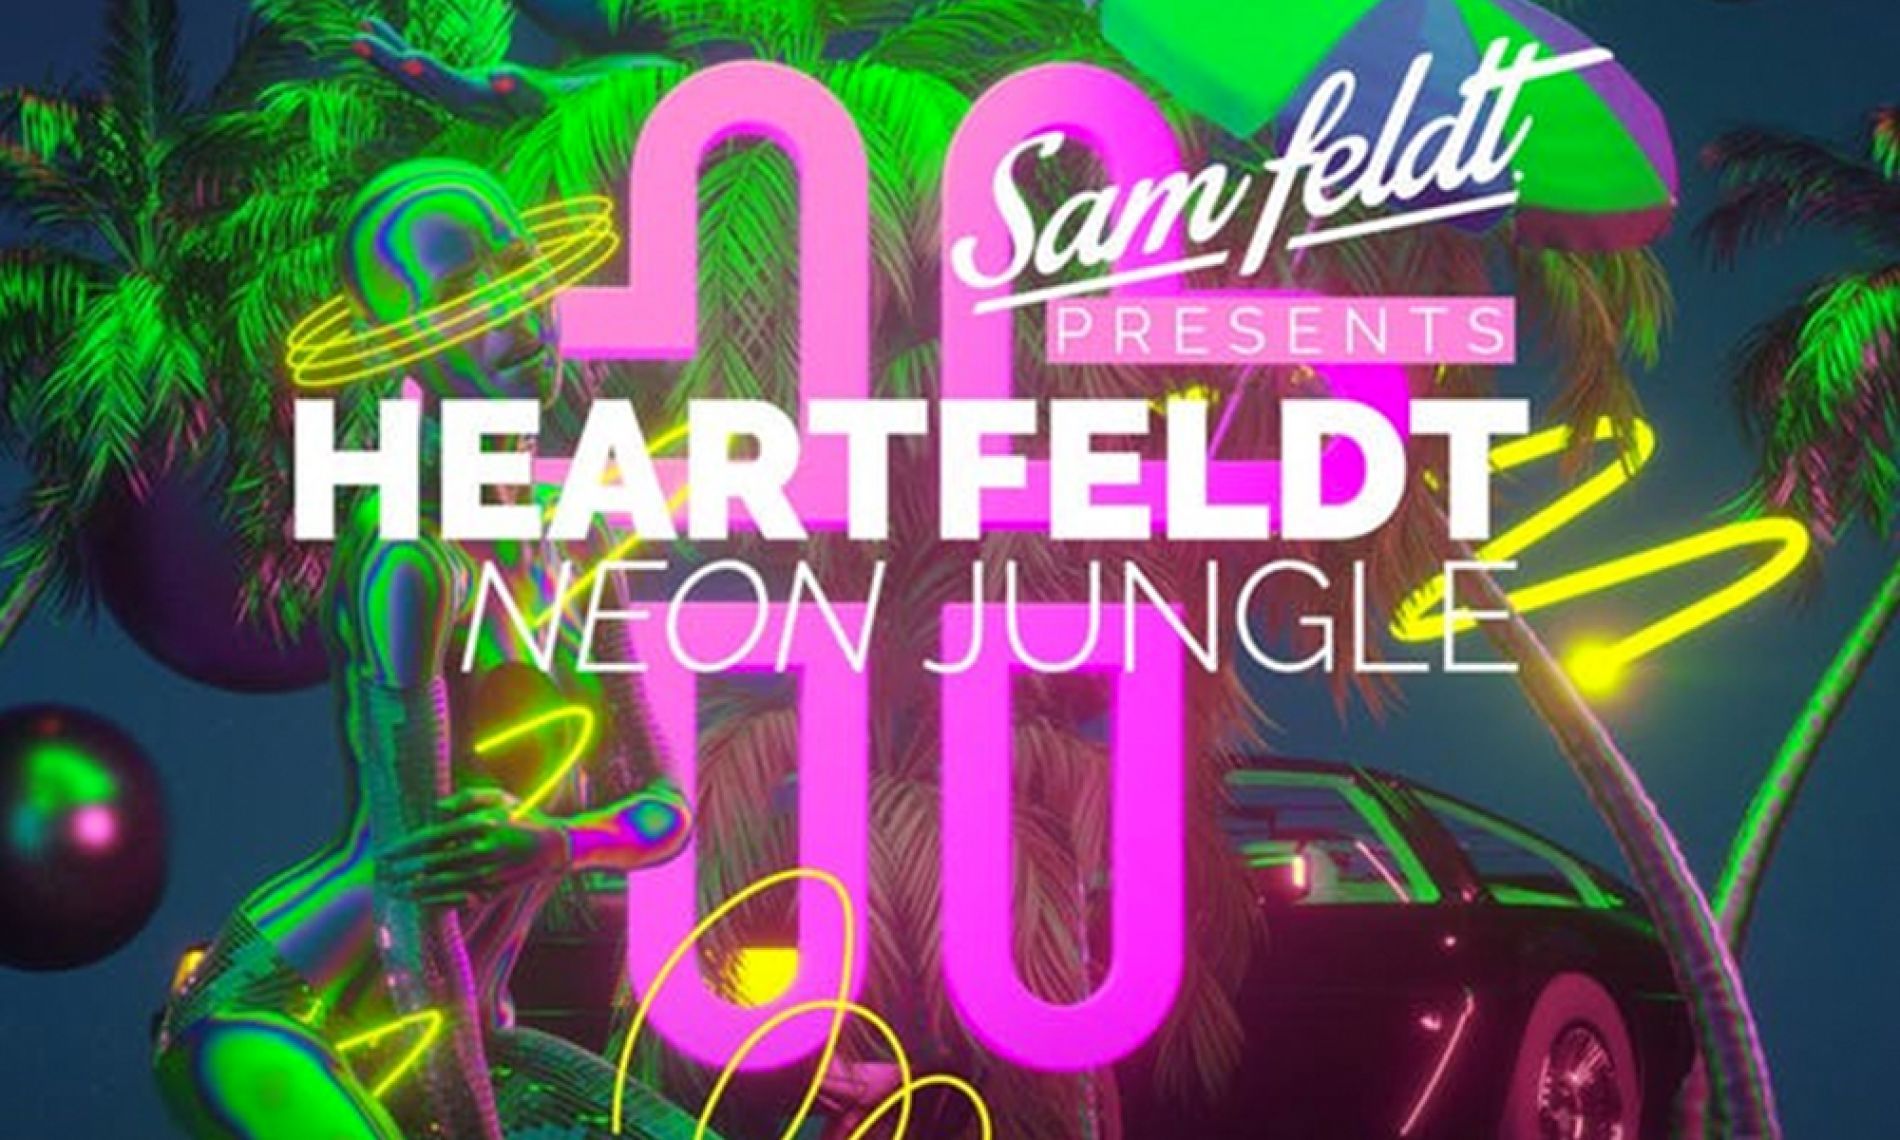 Get two tickets for Sam Feldt's show during Amsterdam Dance Event!